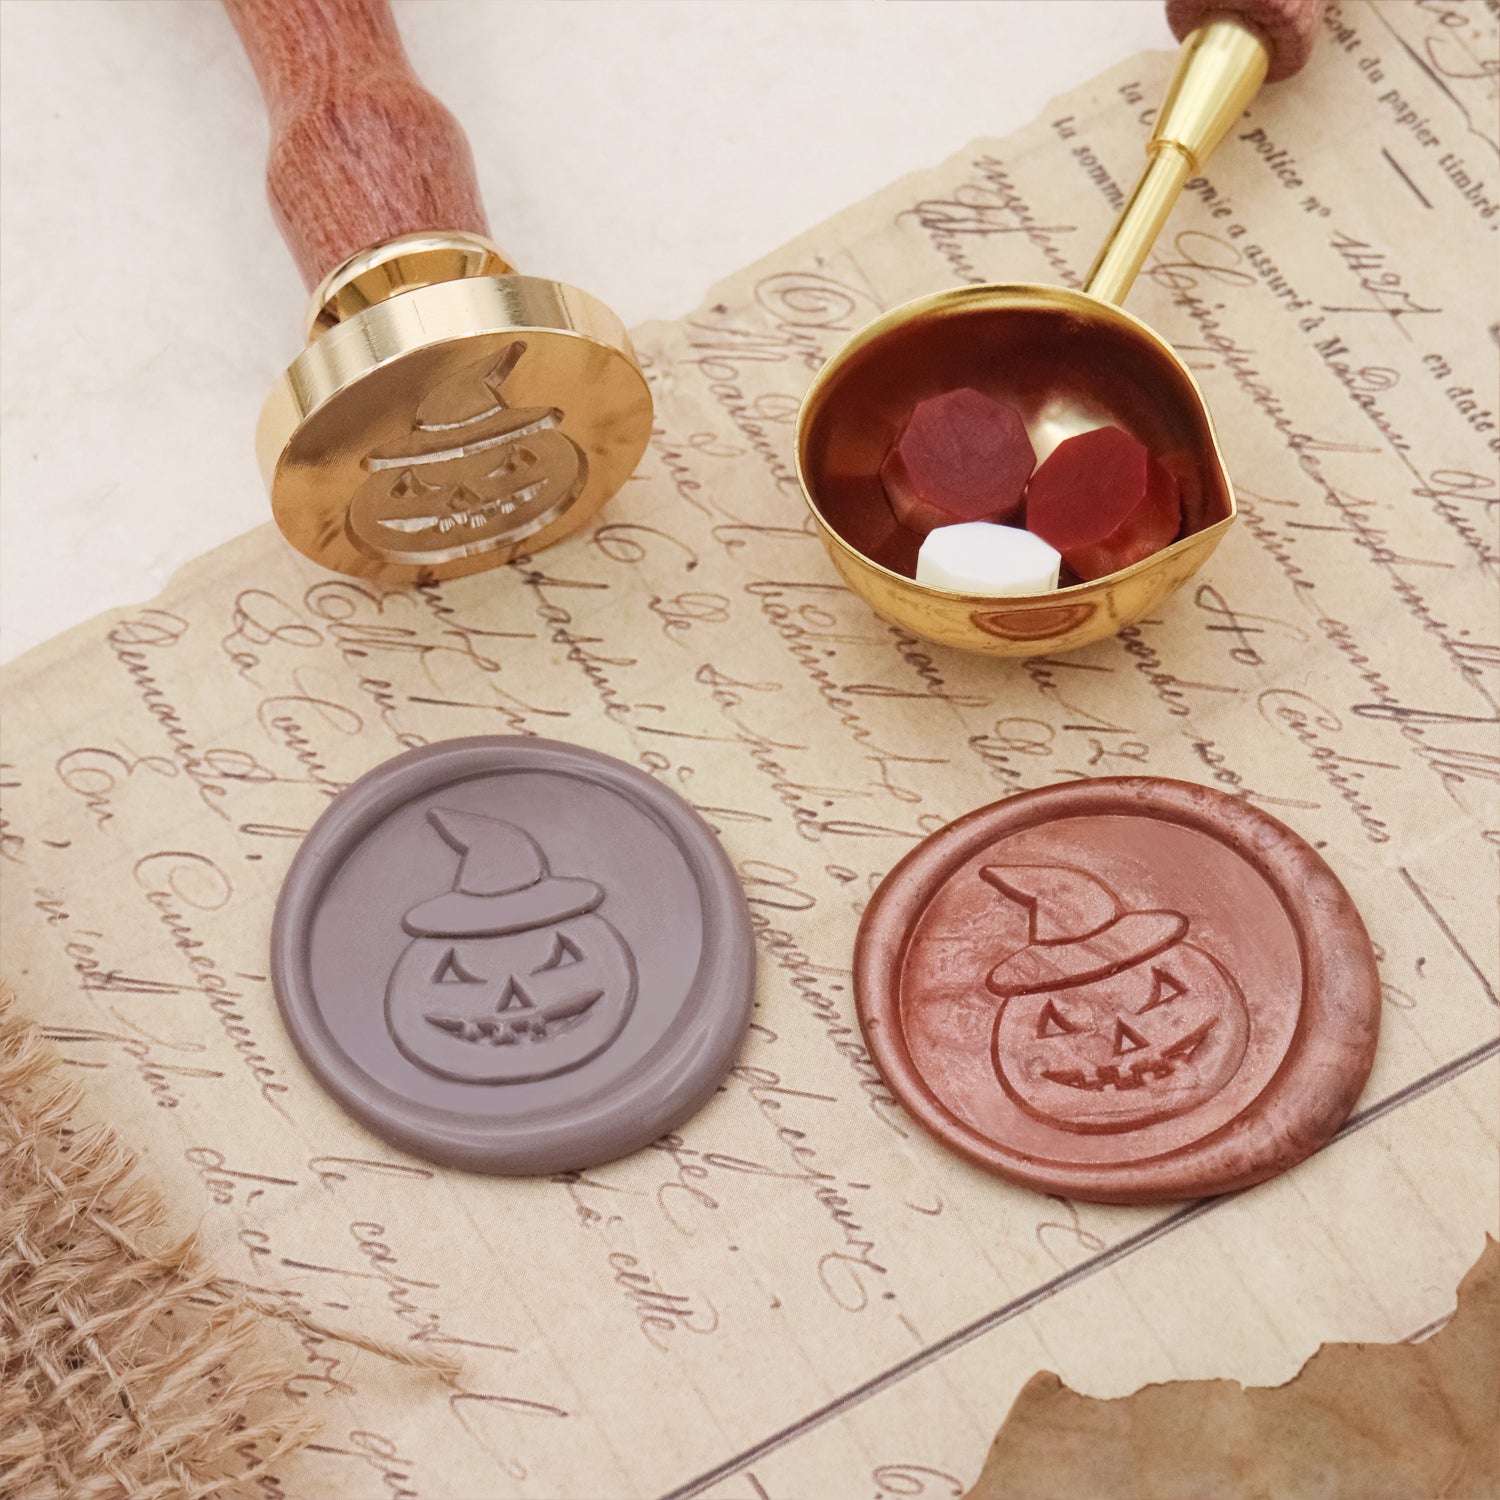 Ready Made Wax Seal Stamp - 3D Relief Halloween and Gothic Wax Seal Stamp (9 Design)